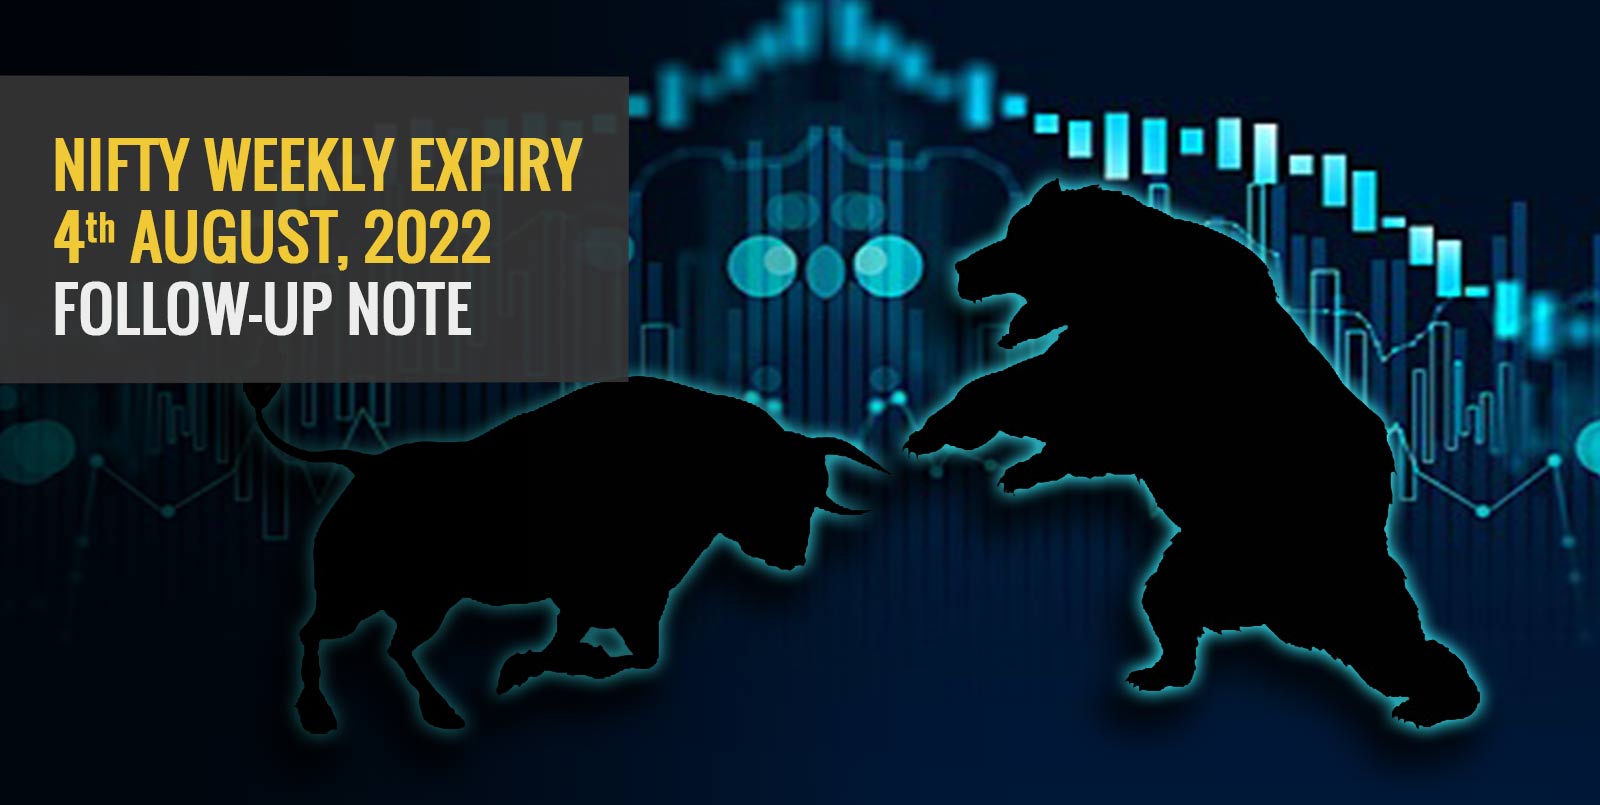 Nifty Weekly Expiry Outlook for 4th August 2022 follow-up note